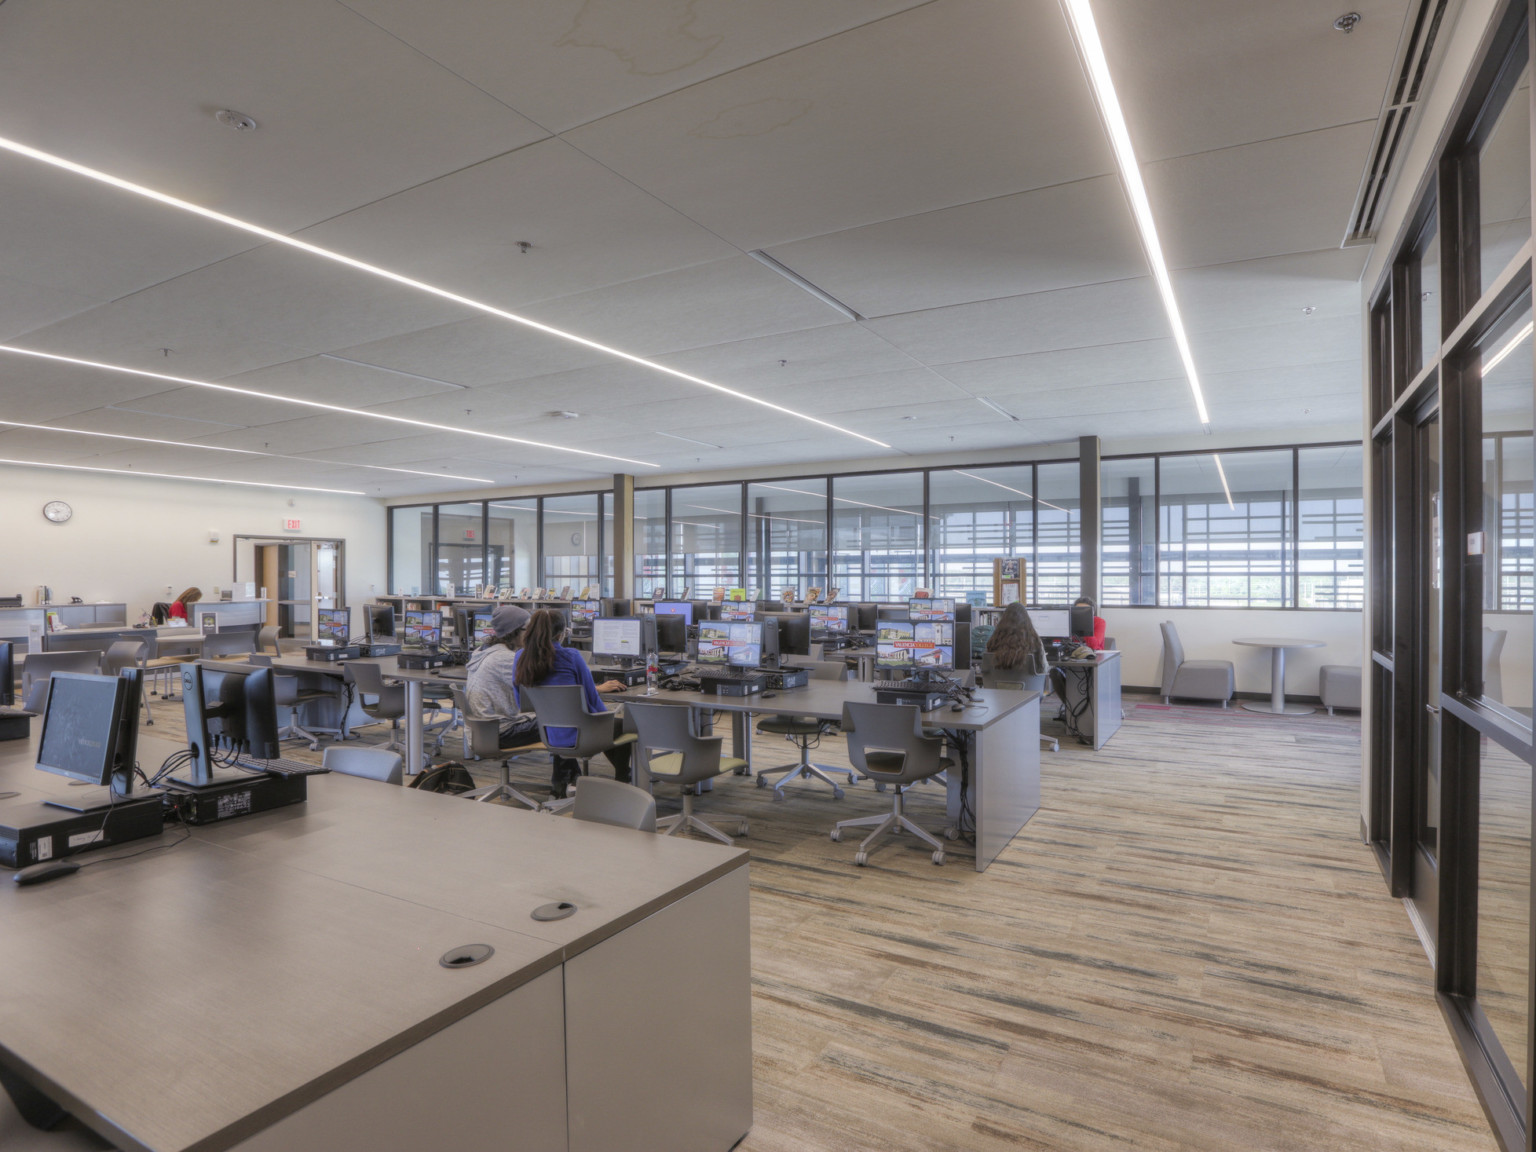 Computer lab space with lines of recessed lighting over wood floors. Glass wall to right, windows line upper back wall